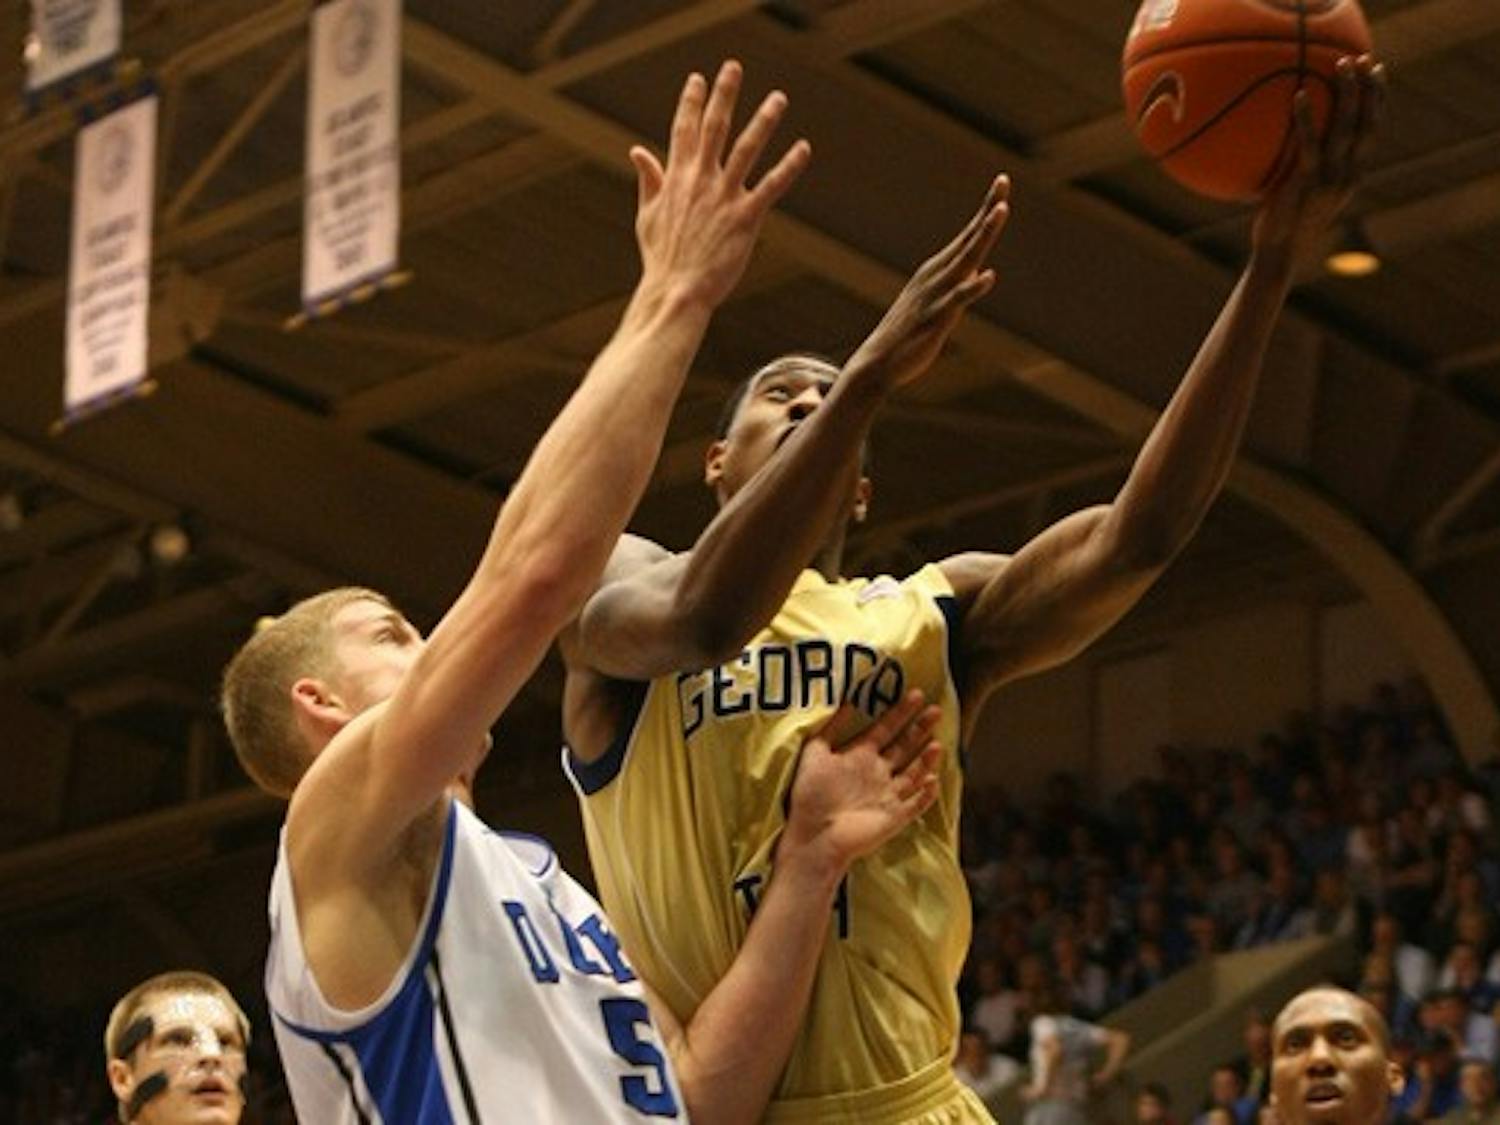 In a physical contest, Duke played lockdown defense on Georgia Tech, holding the team to only 57 points and a 33 percent shooting percentage.